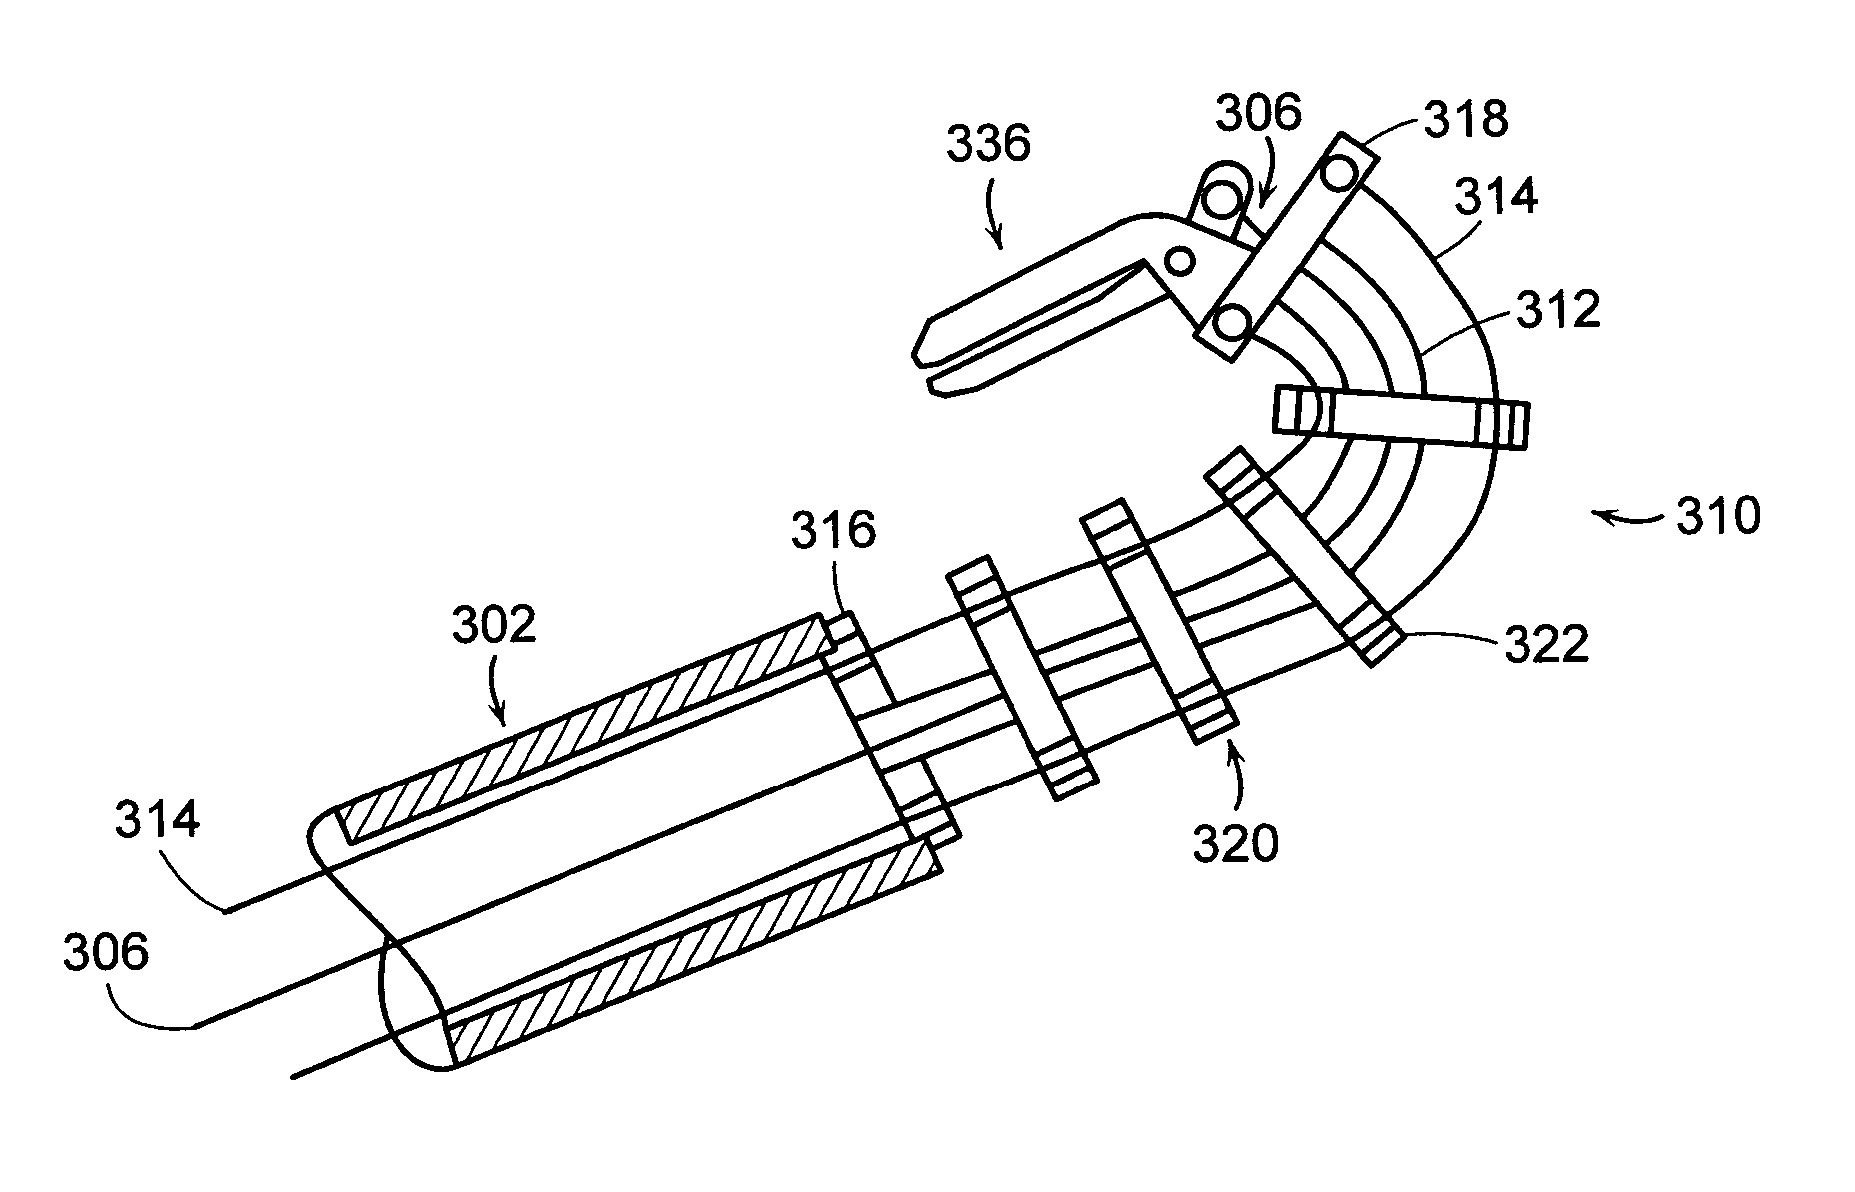 Devices, systems and methods for minimally invasive surgery of the throat and other portions of mammalian body